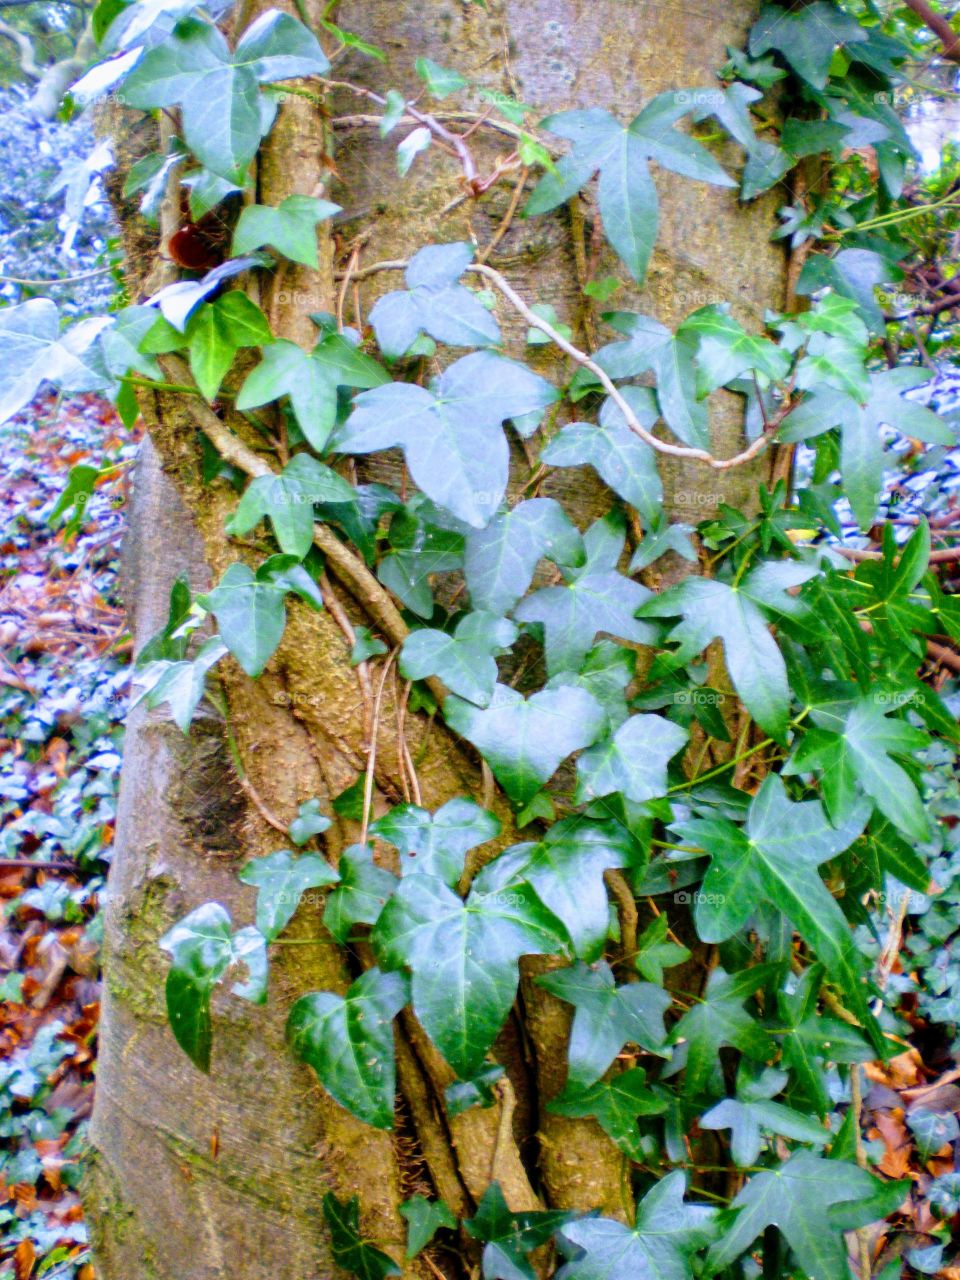 Vines wrapped around a tree